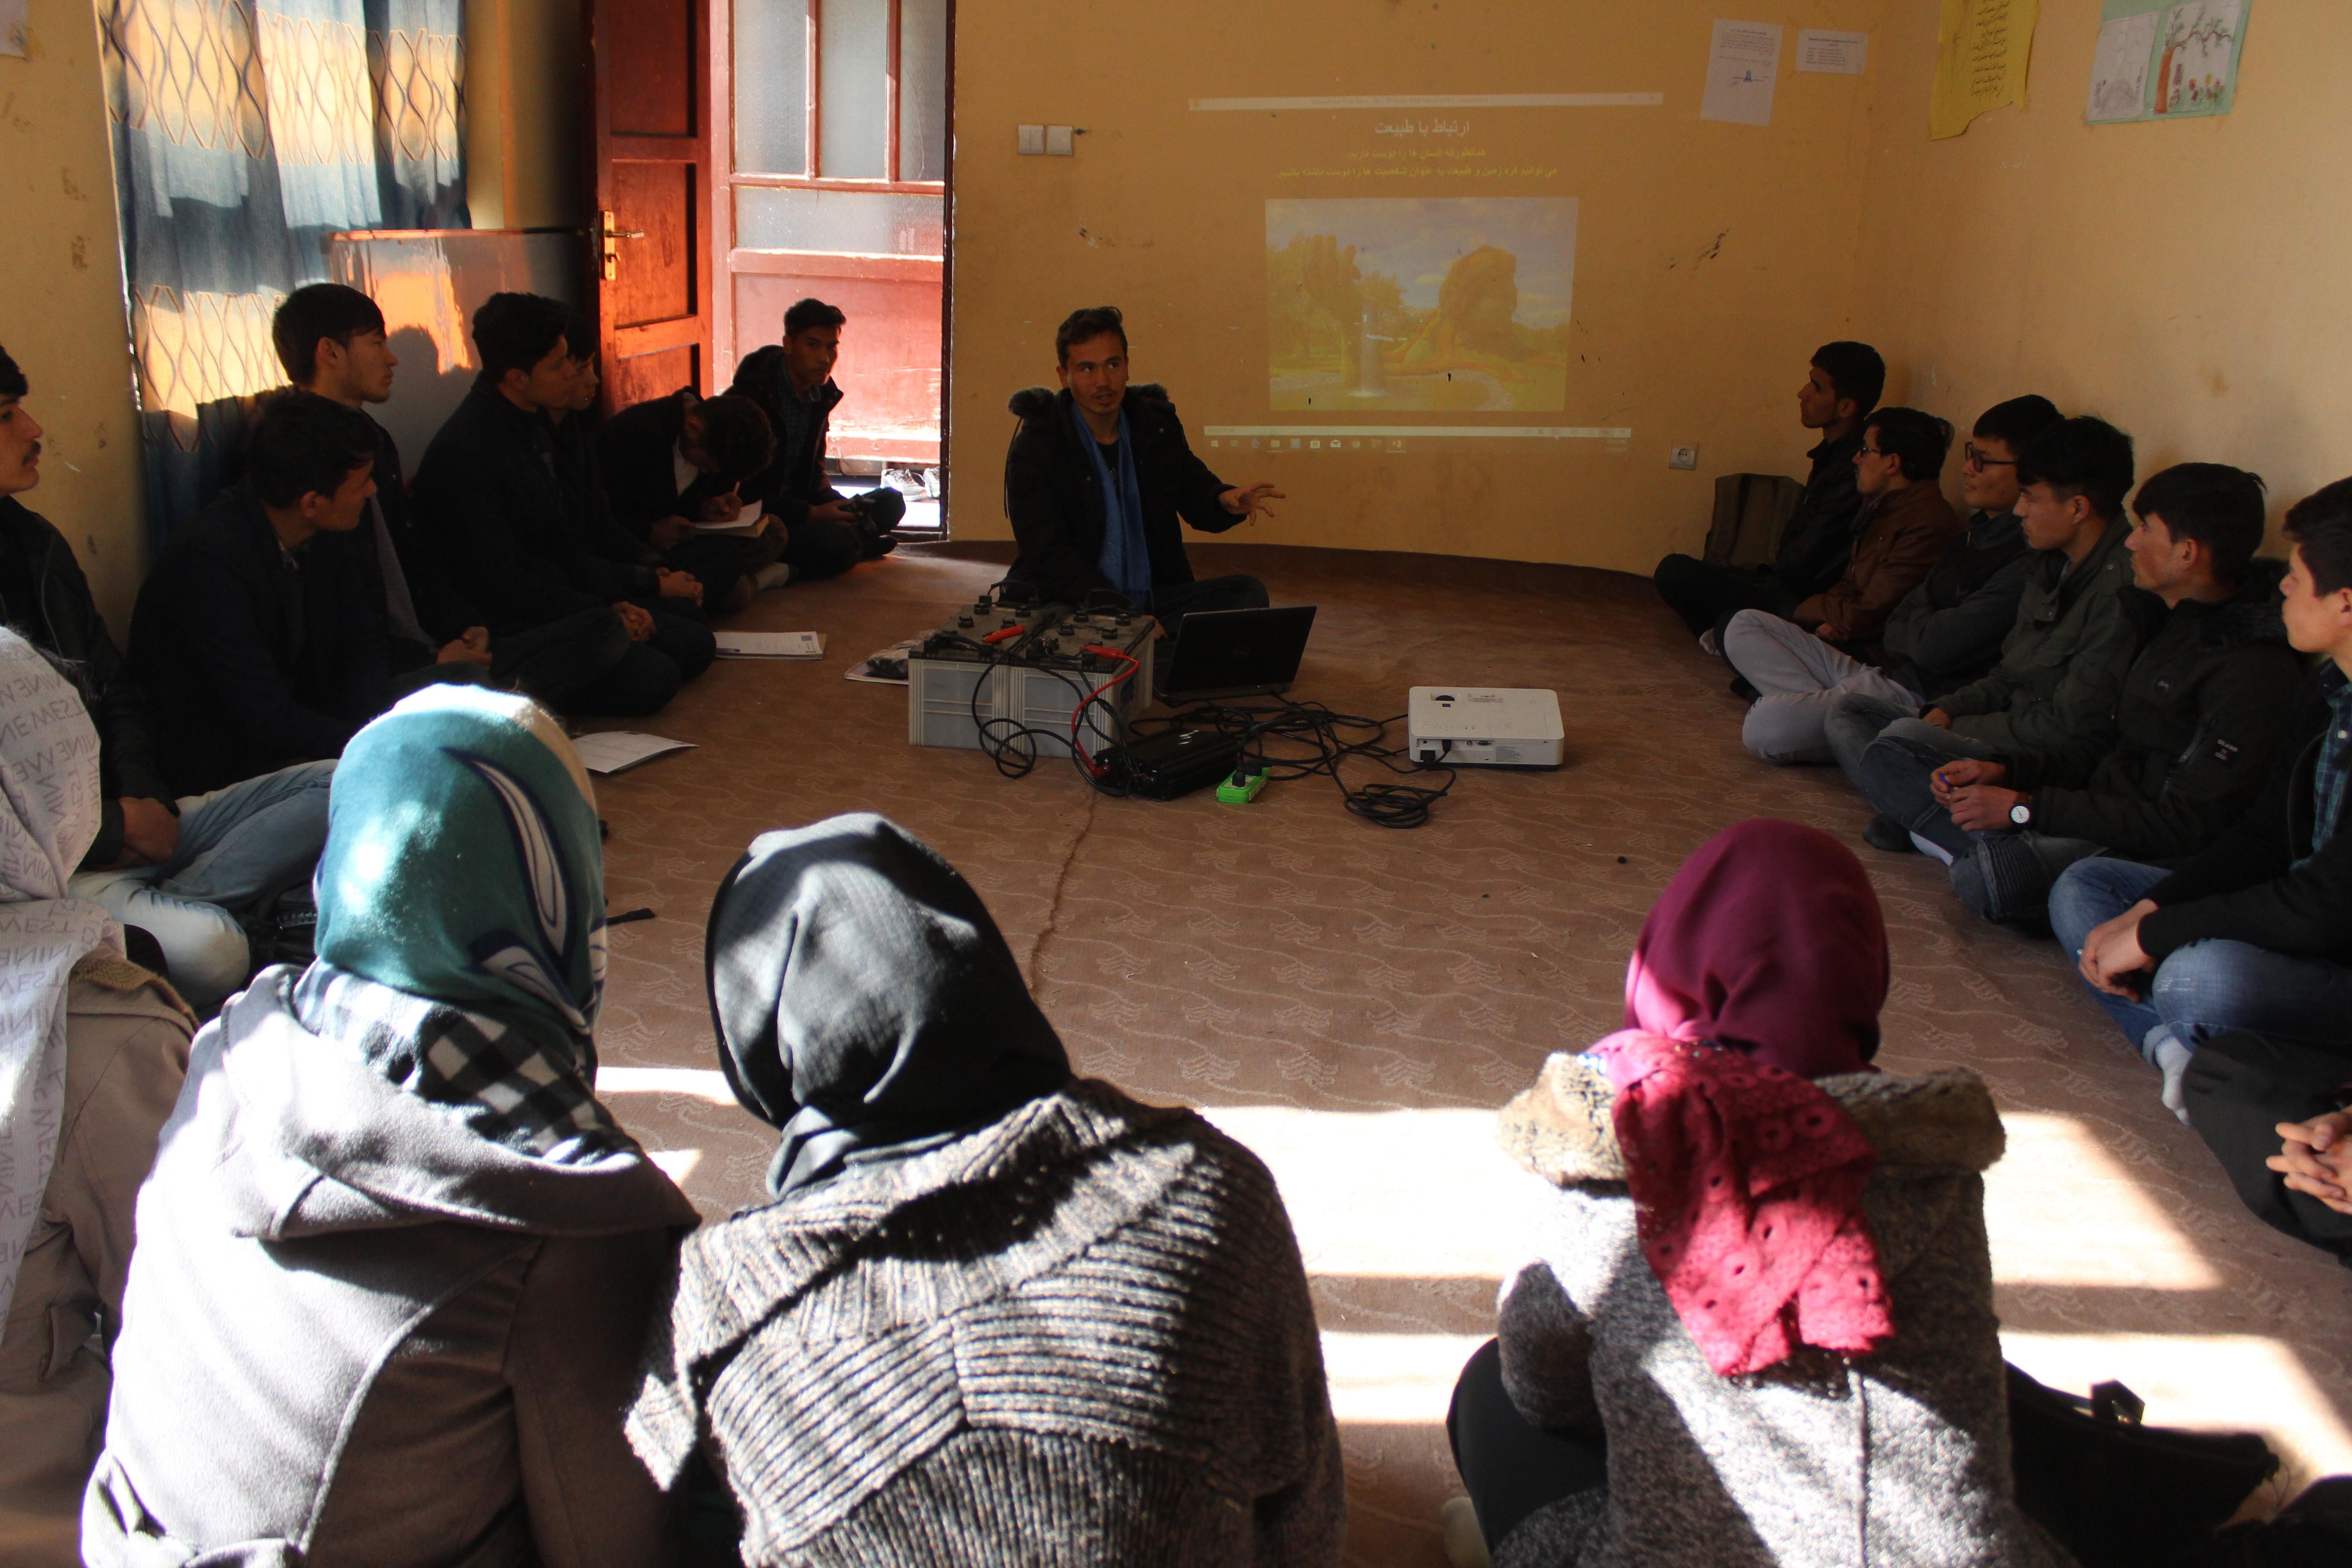 Muhammad Ali teaching a “relational learning circle” class during orientation at the APV Borderfree . (Photo: Dr. Hakim)